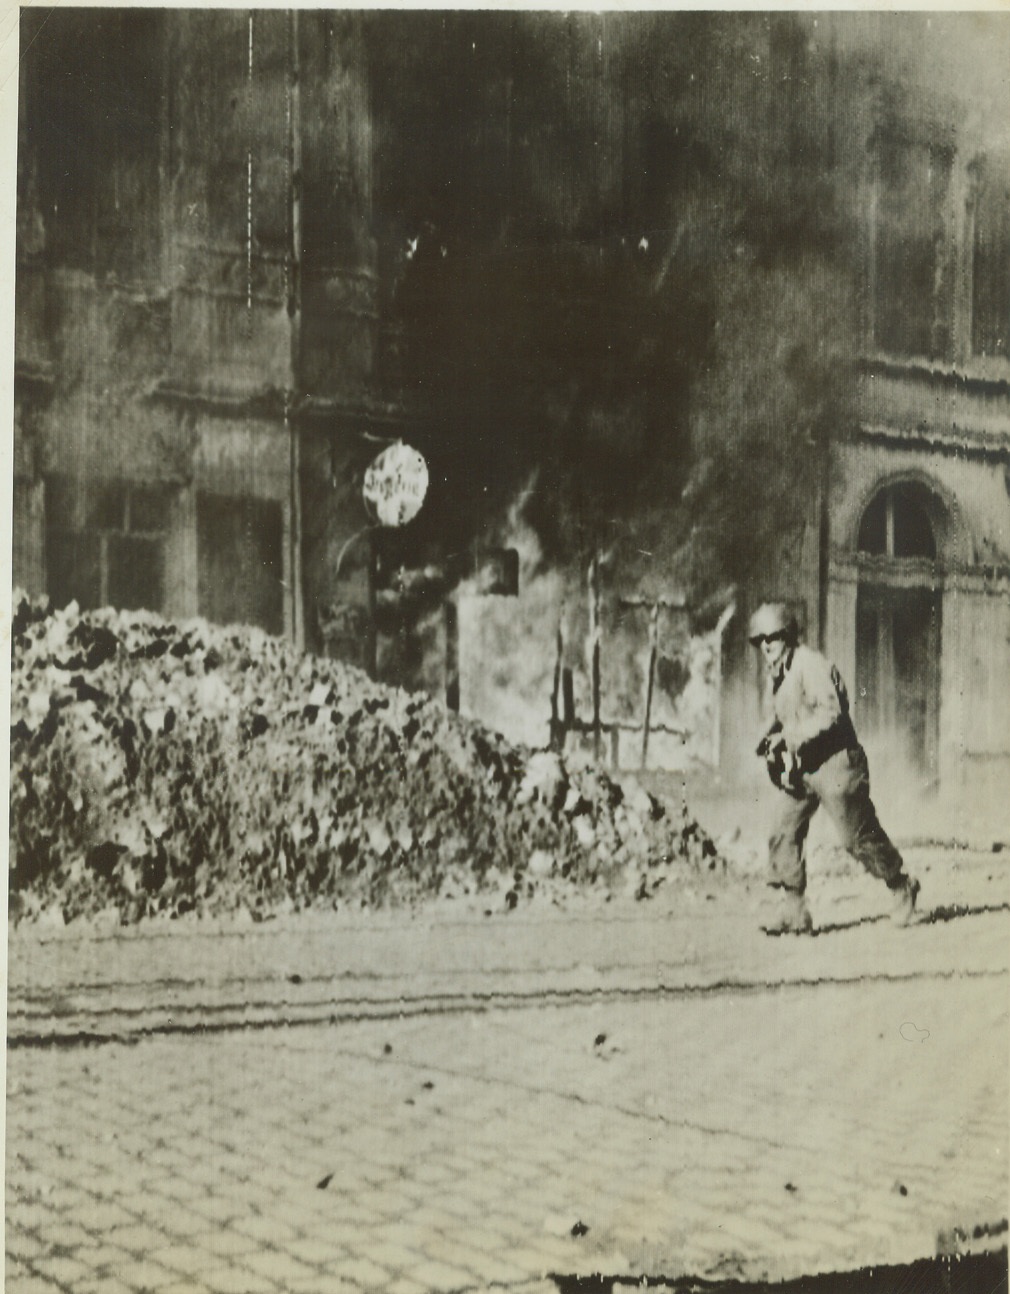 Inching Ahead in Aachen, 10/16/1944. AACHEN, GERMANY – Running past a blazing building, an American Infantryman advances through the streets of embattled Aachen. Credit: (Army Radiotelephoto from ACME);